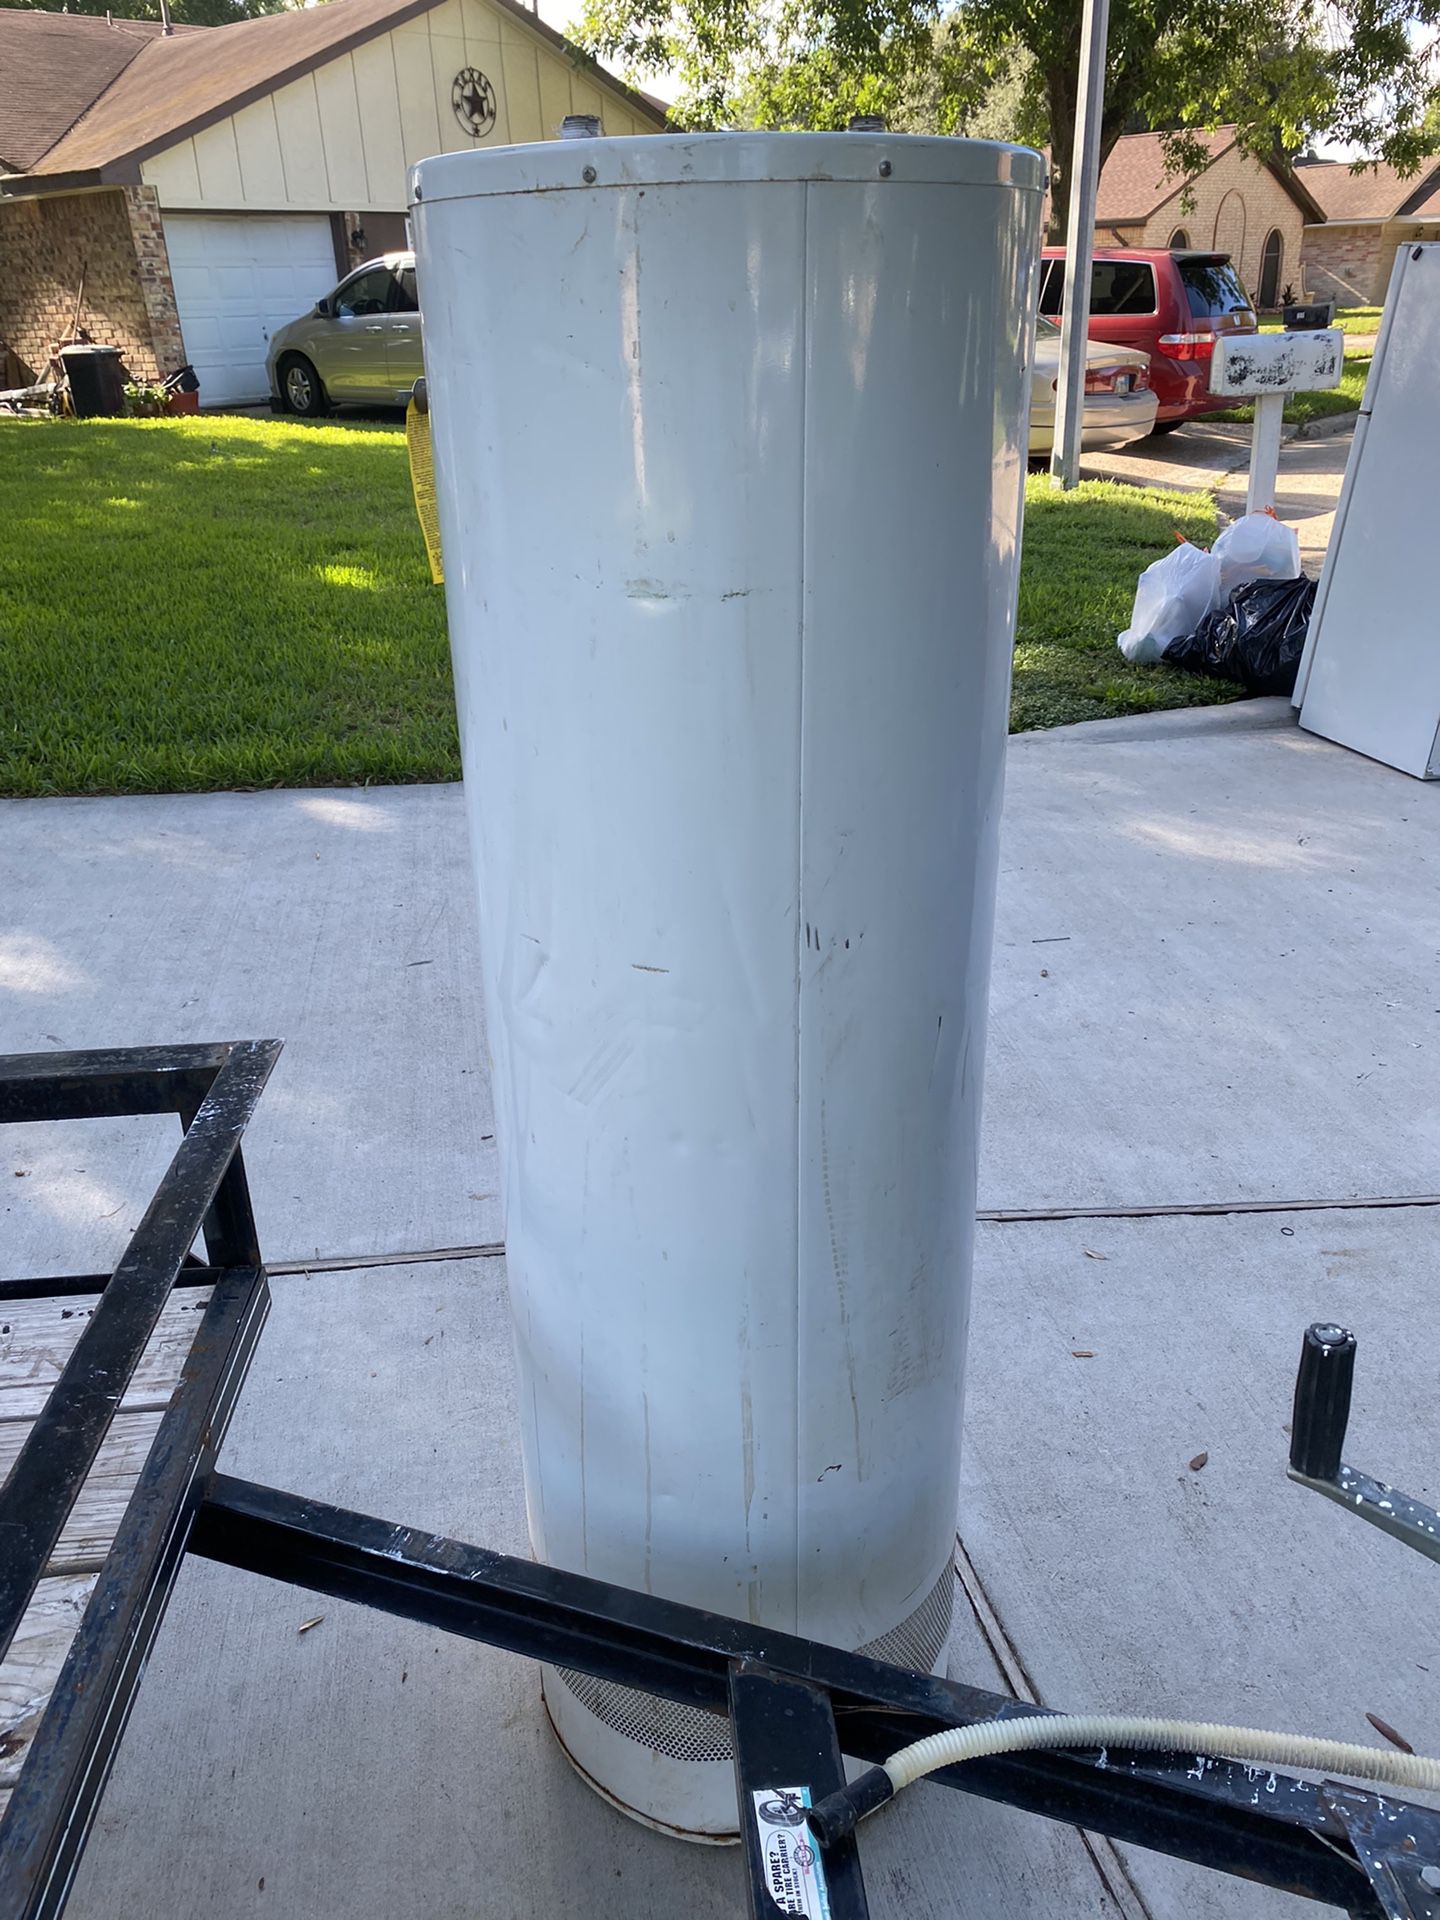 Water Heater Insulation Blanlet for Sale in Loves Park, IL - OfferUp